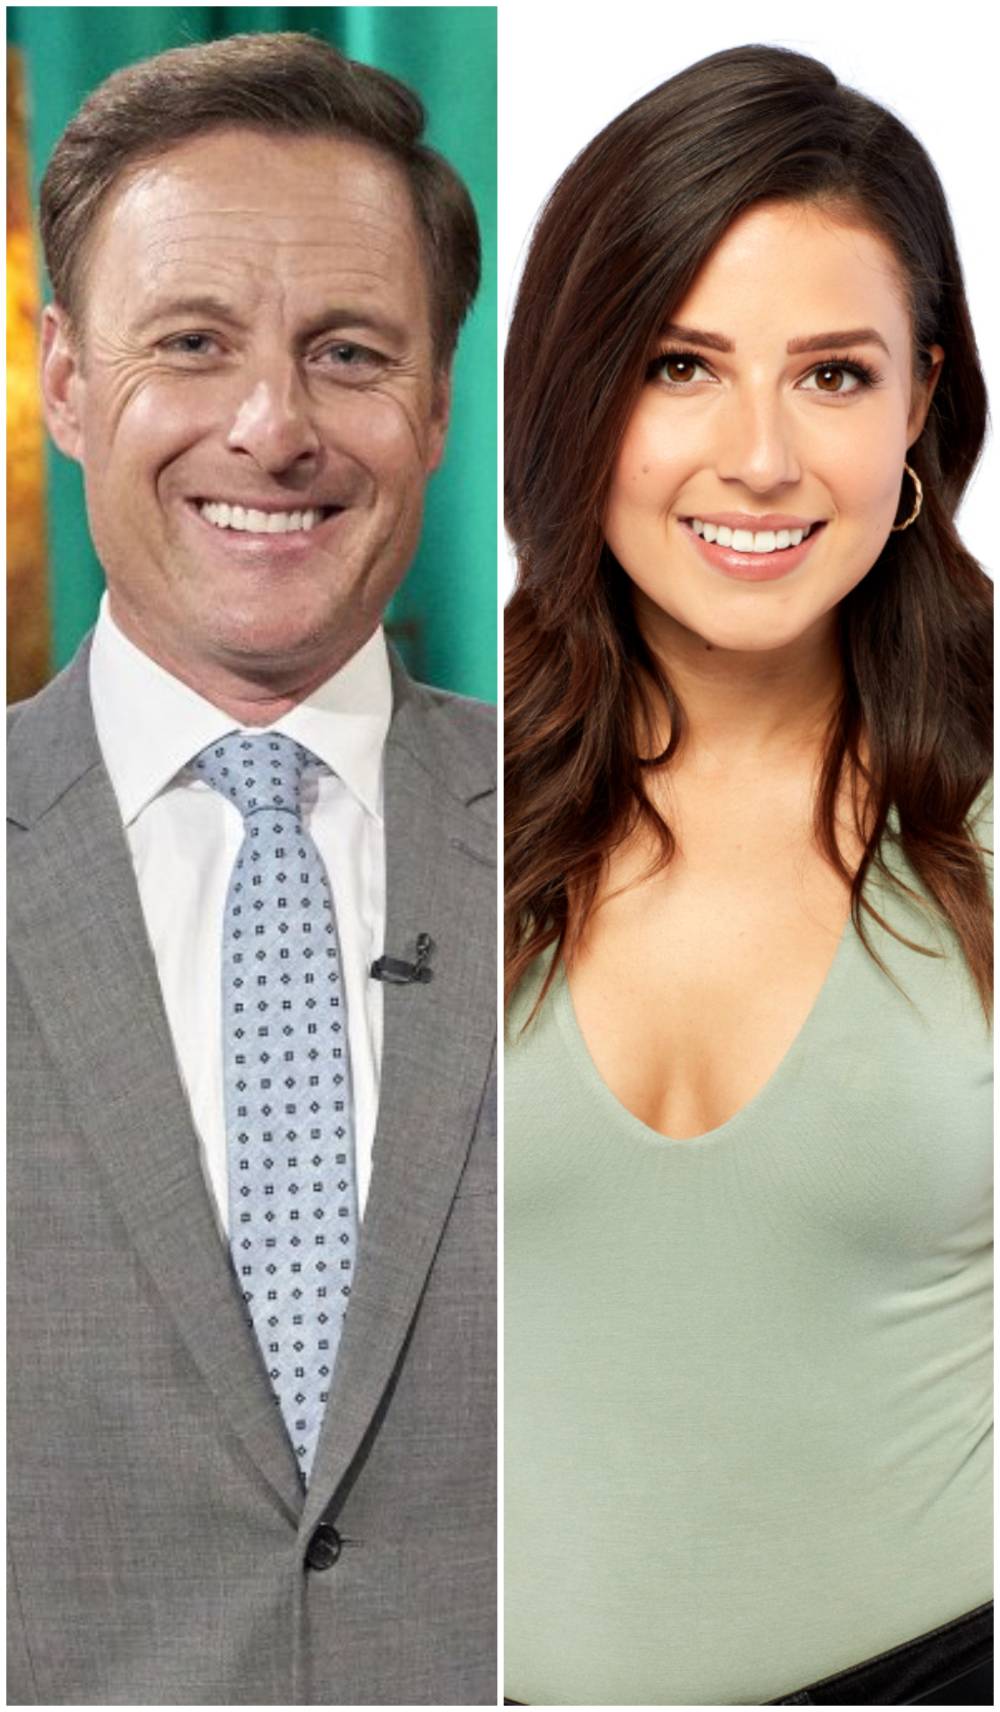 Chris Harrison Addresses Speculation That Katie Thurston Is the New Bachelorette